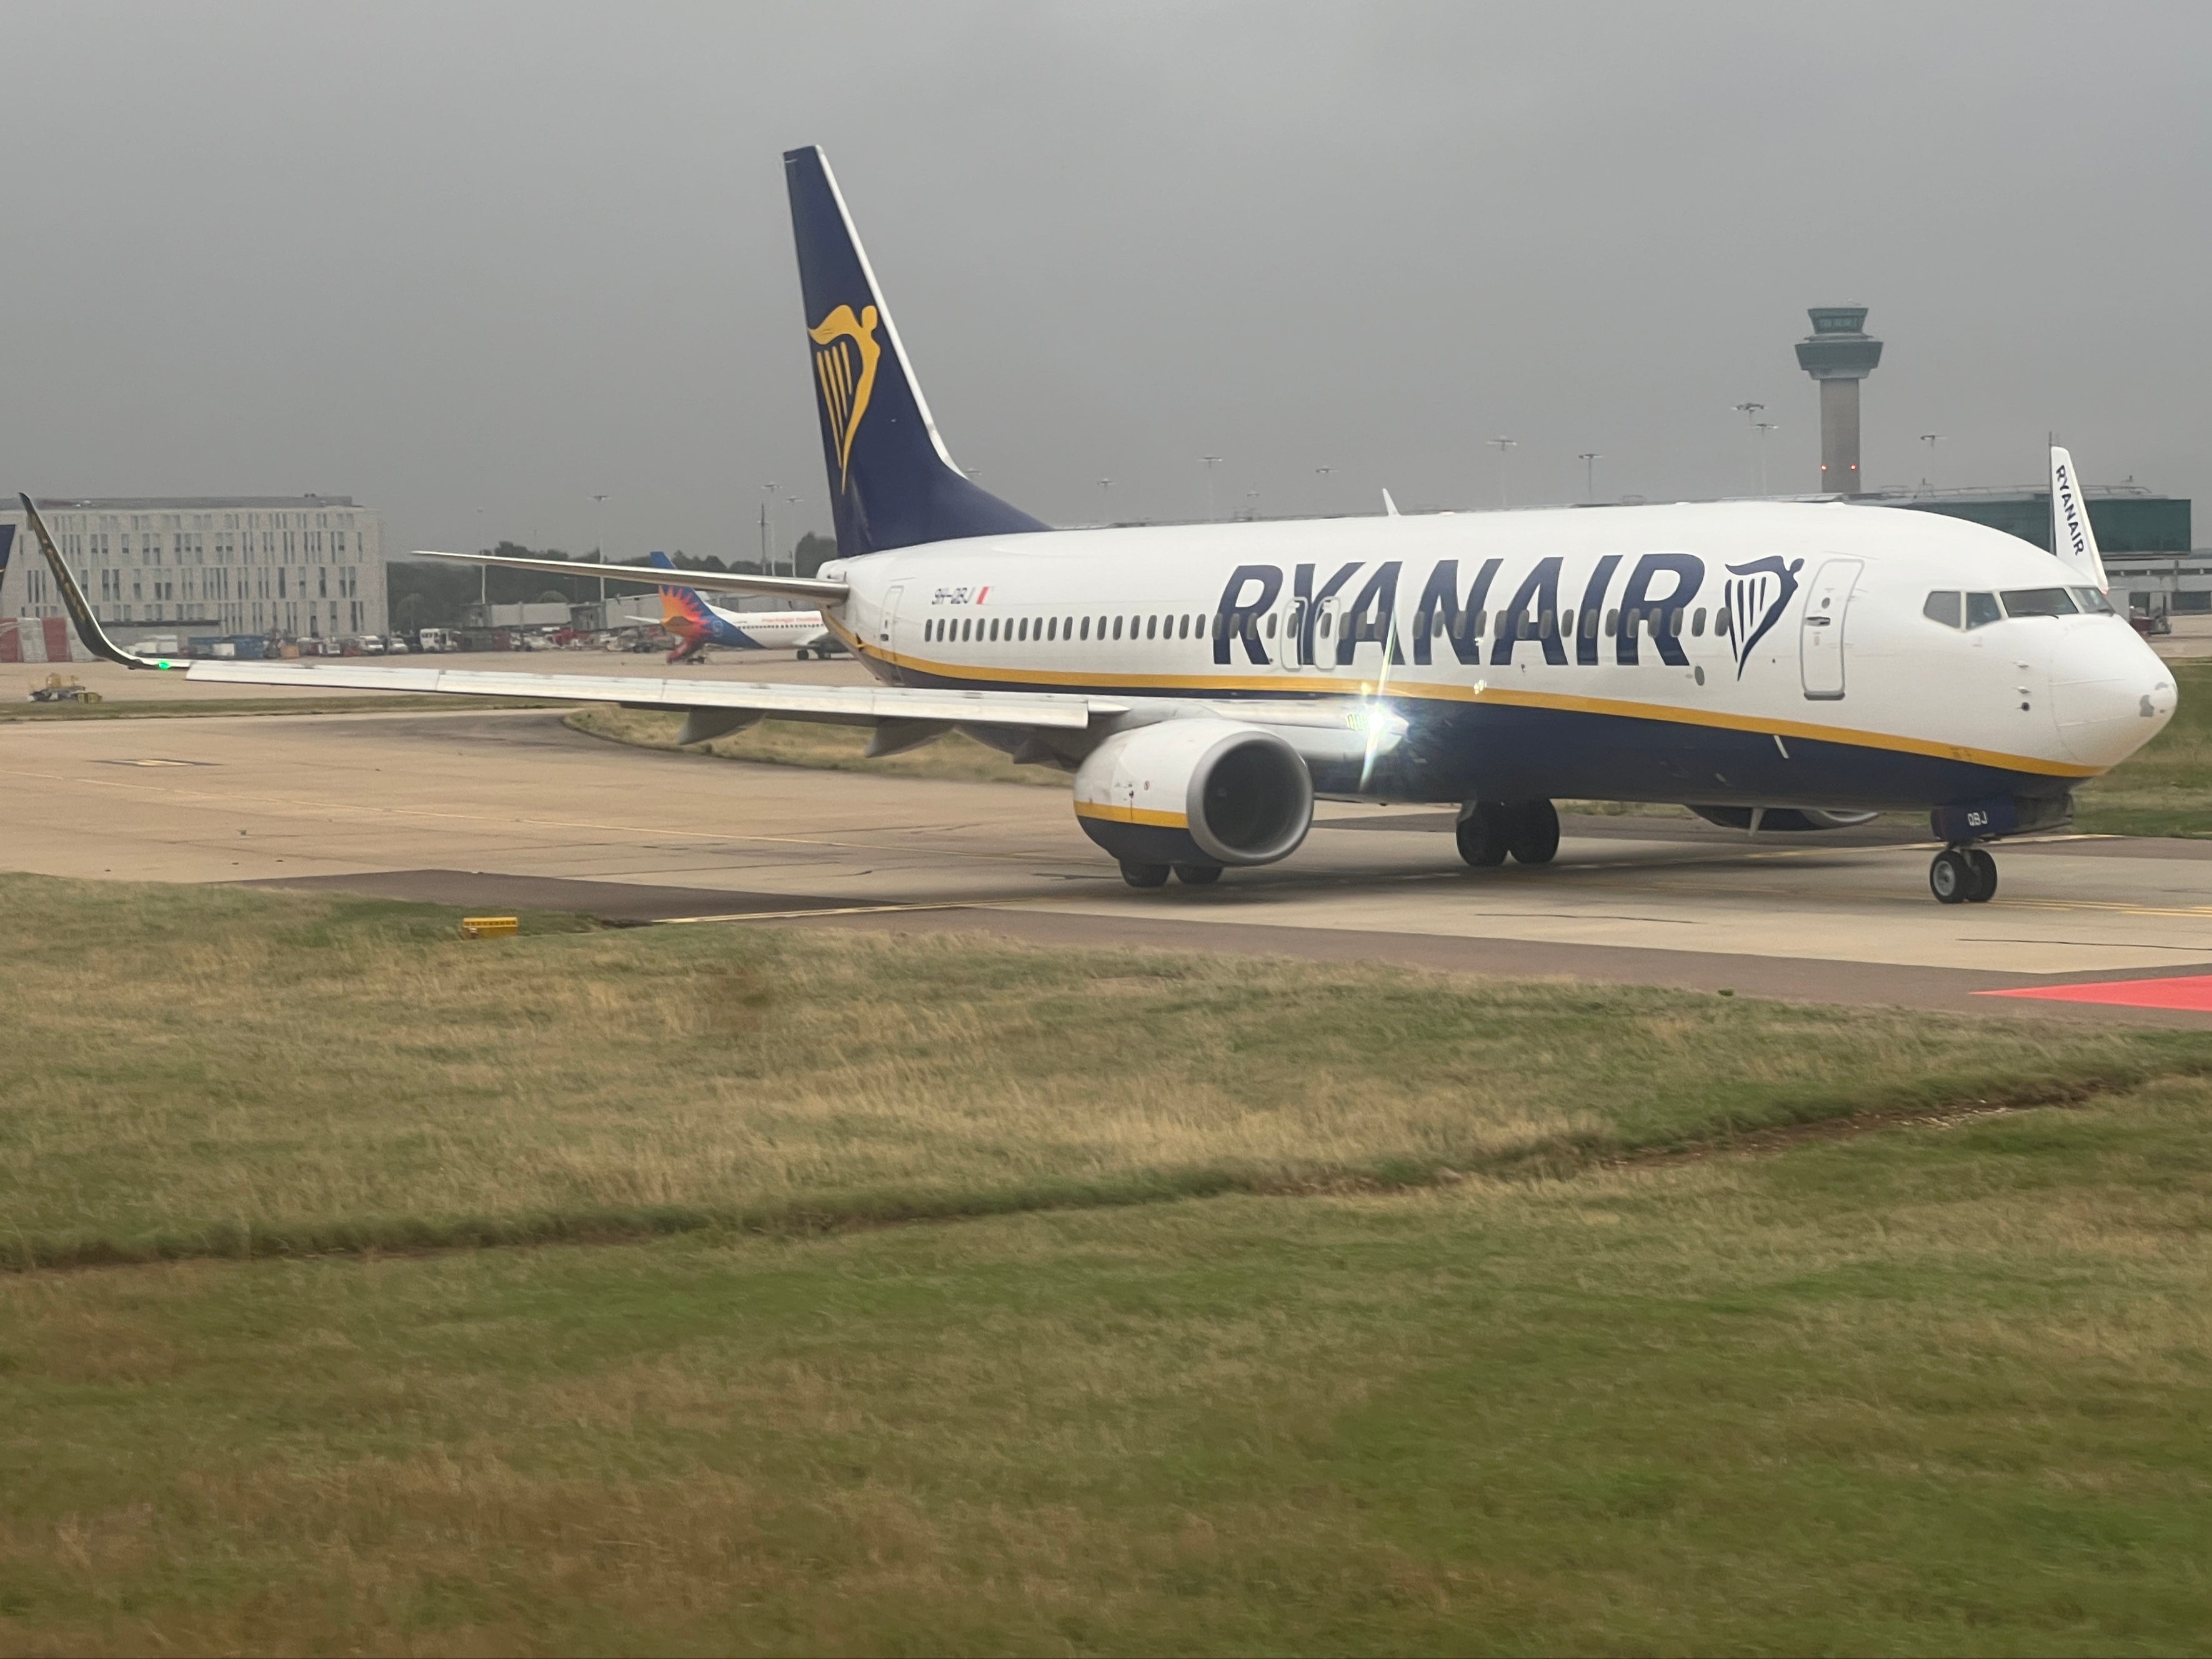 Going places? At Stansted airport, its main UK base, Ryanair has cancelled 38 flights